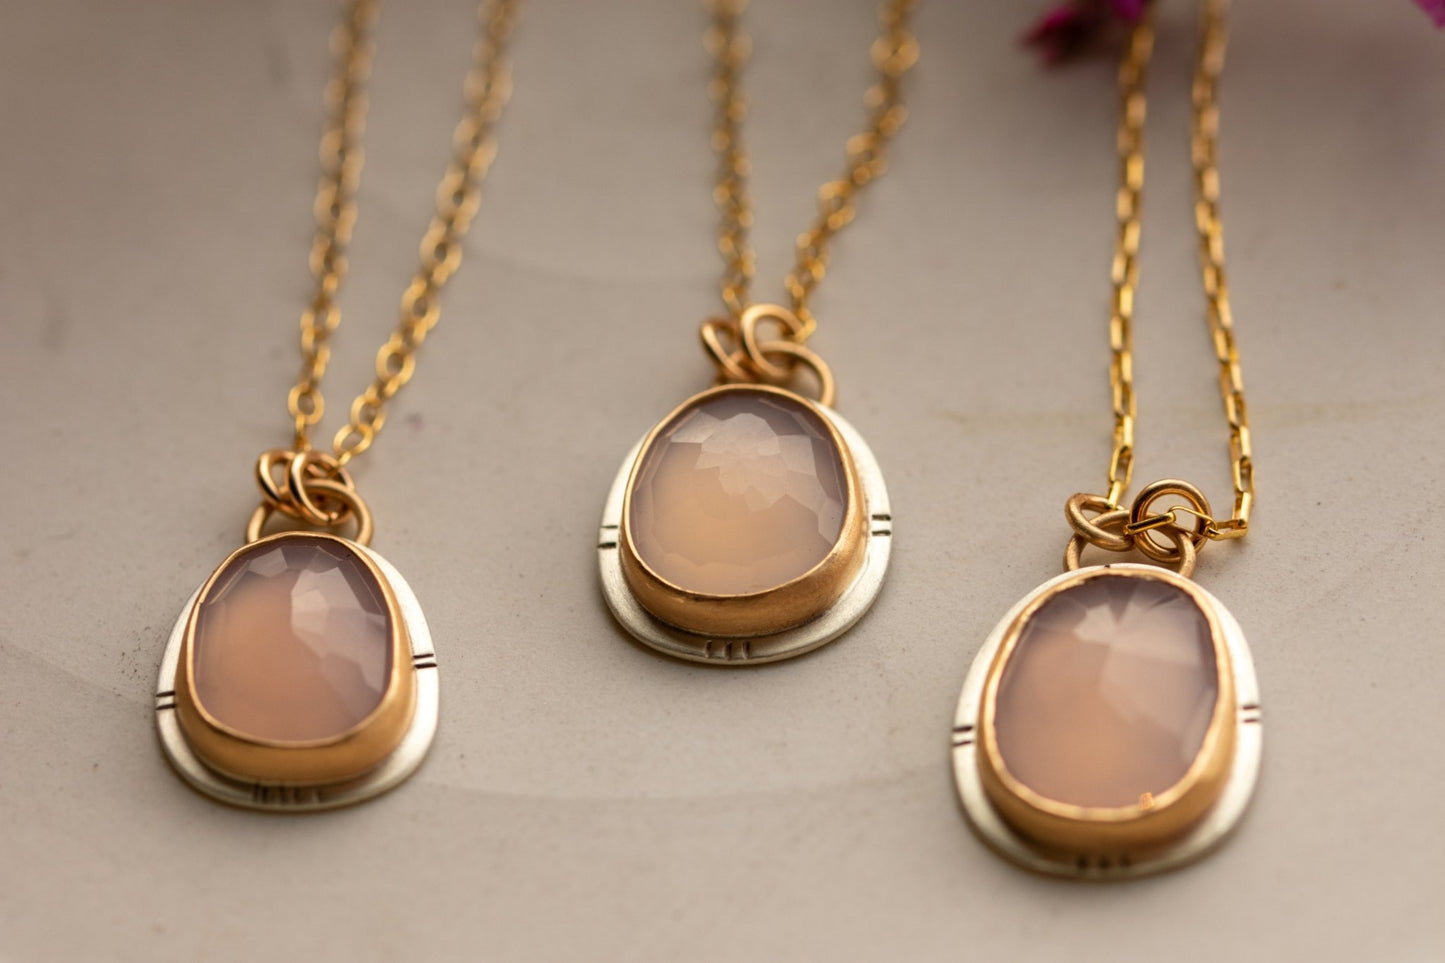 BELOVED PINK CHALCEDONY NECKLACES - Fly Free